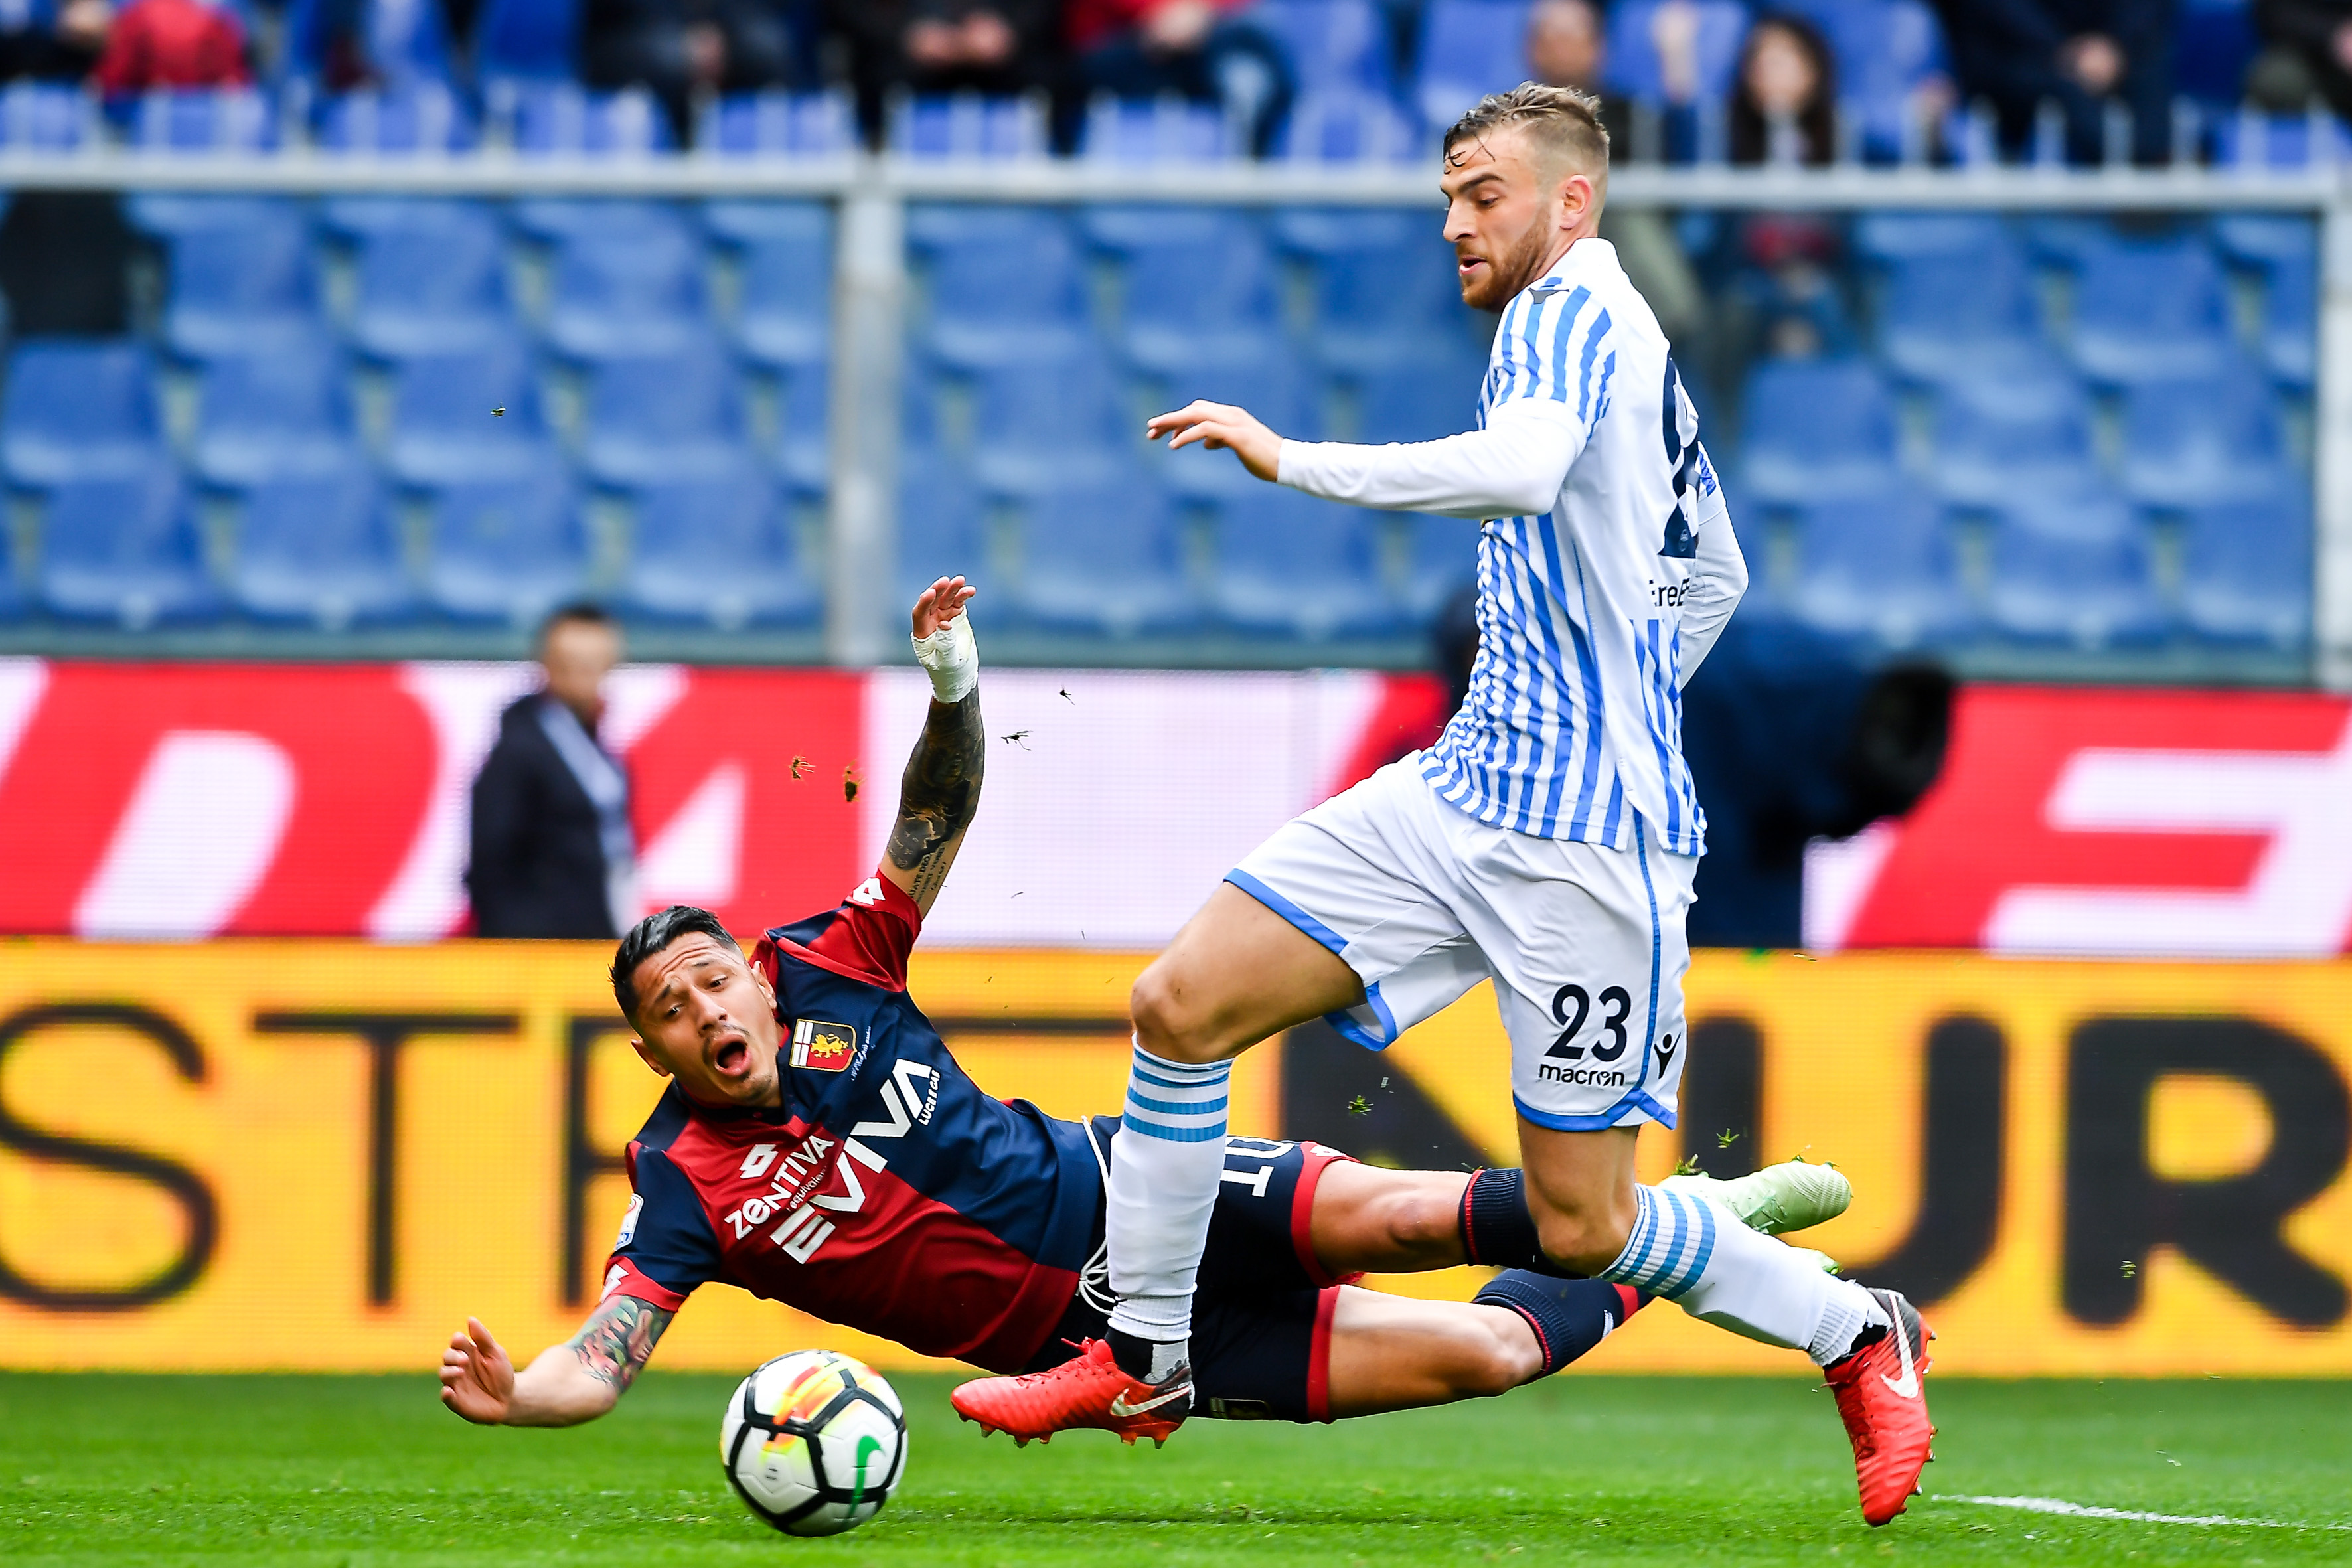 GENOA, ITALY - MARCH 31: Francesco Vicari of Spal tackles Gianluca Lapadula of Genoa who will be given a penalty kick during the serie A match between Genoa CFC and Spal at Stadio Luigi Ferraris on March 31, 2018 in Genoa, Italy. (Photo by Paolo Rattini/Getty Images)